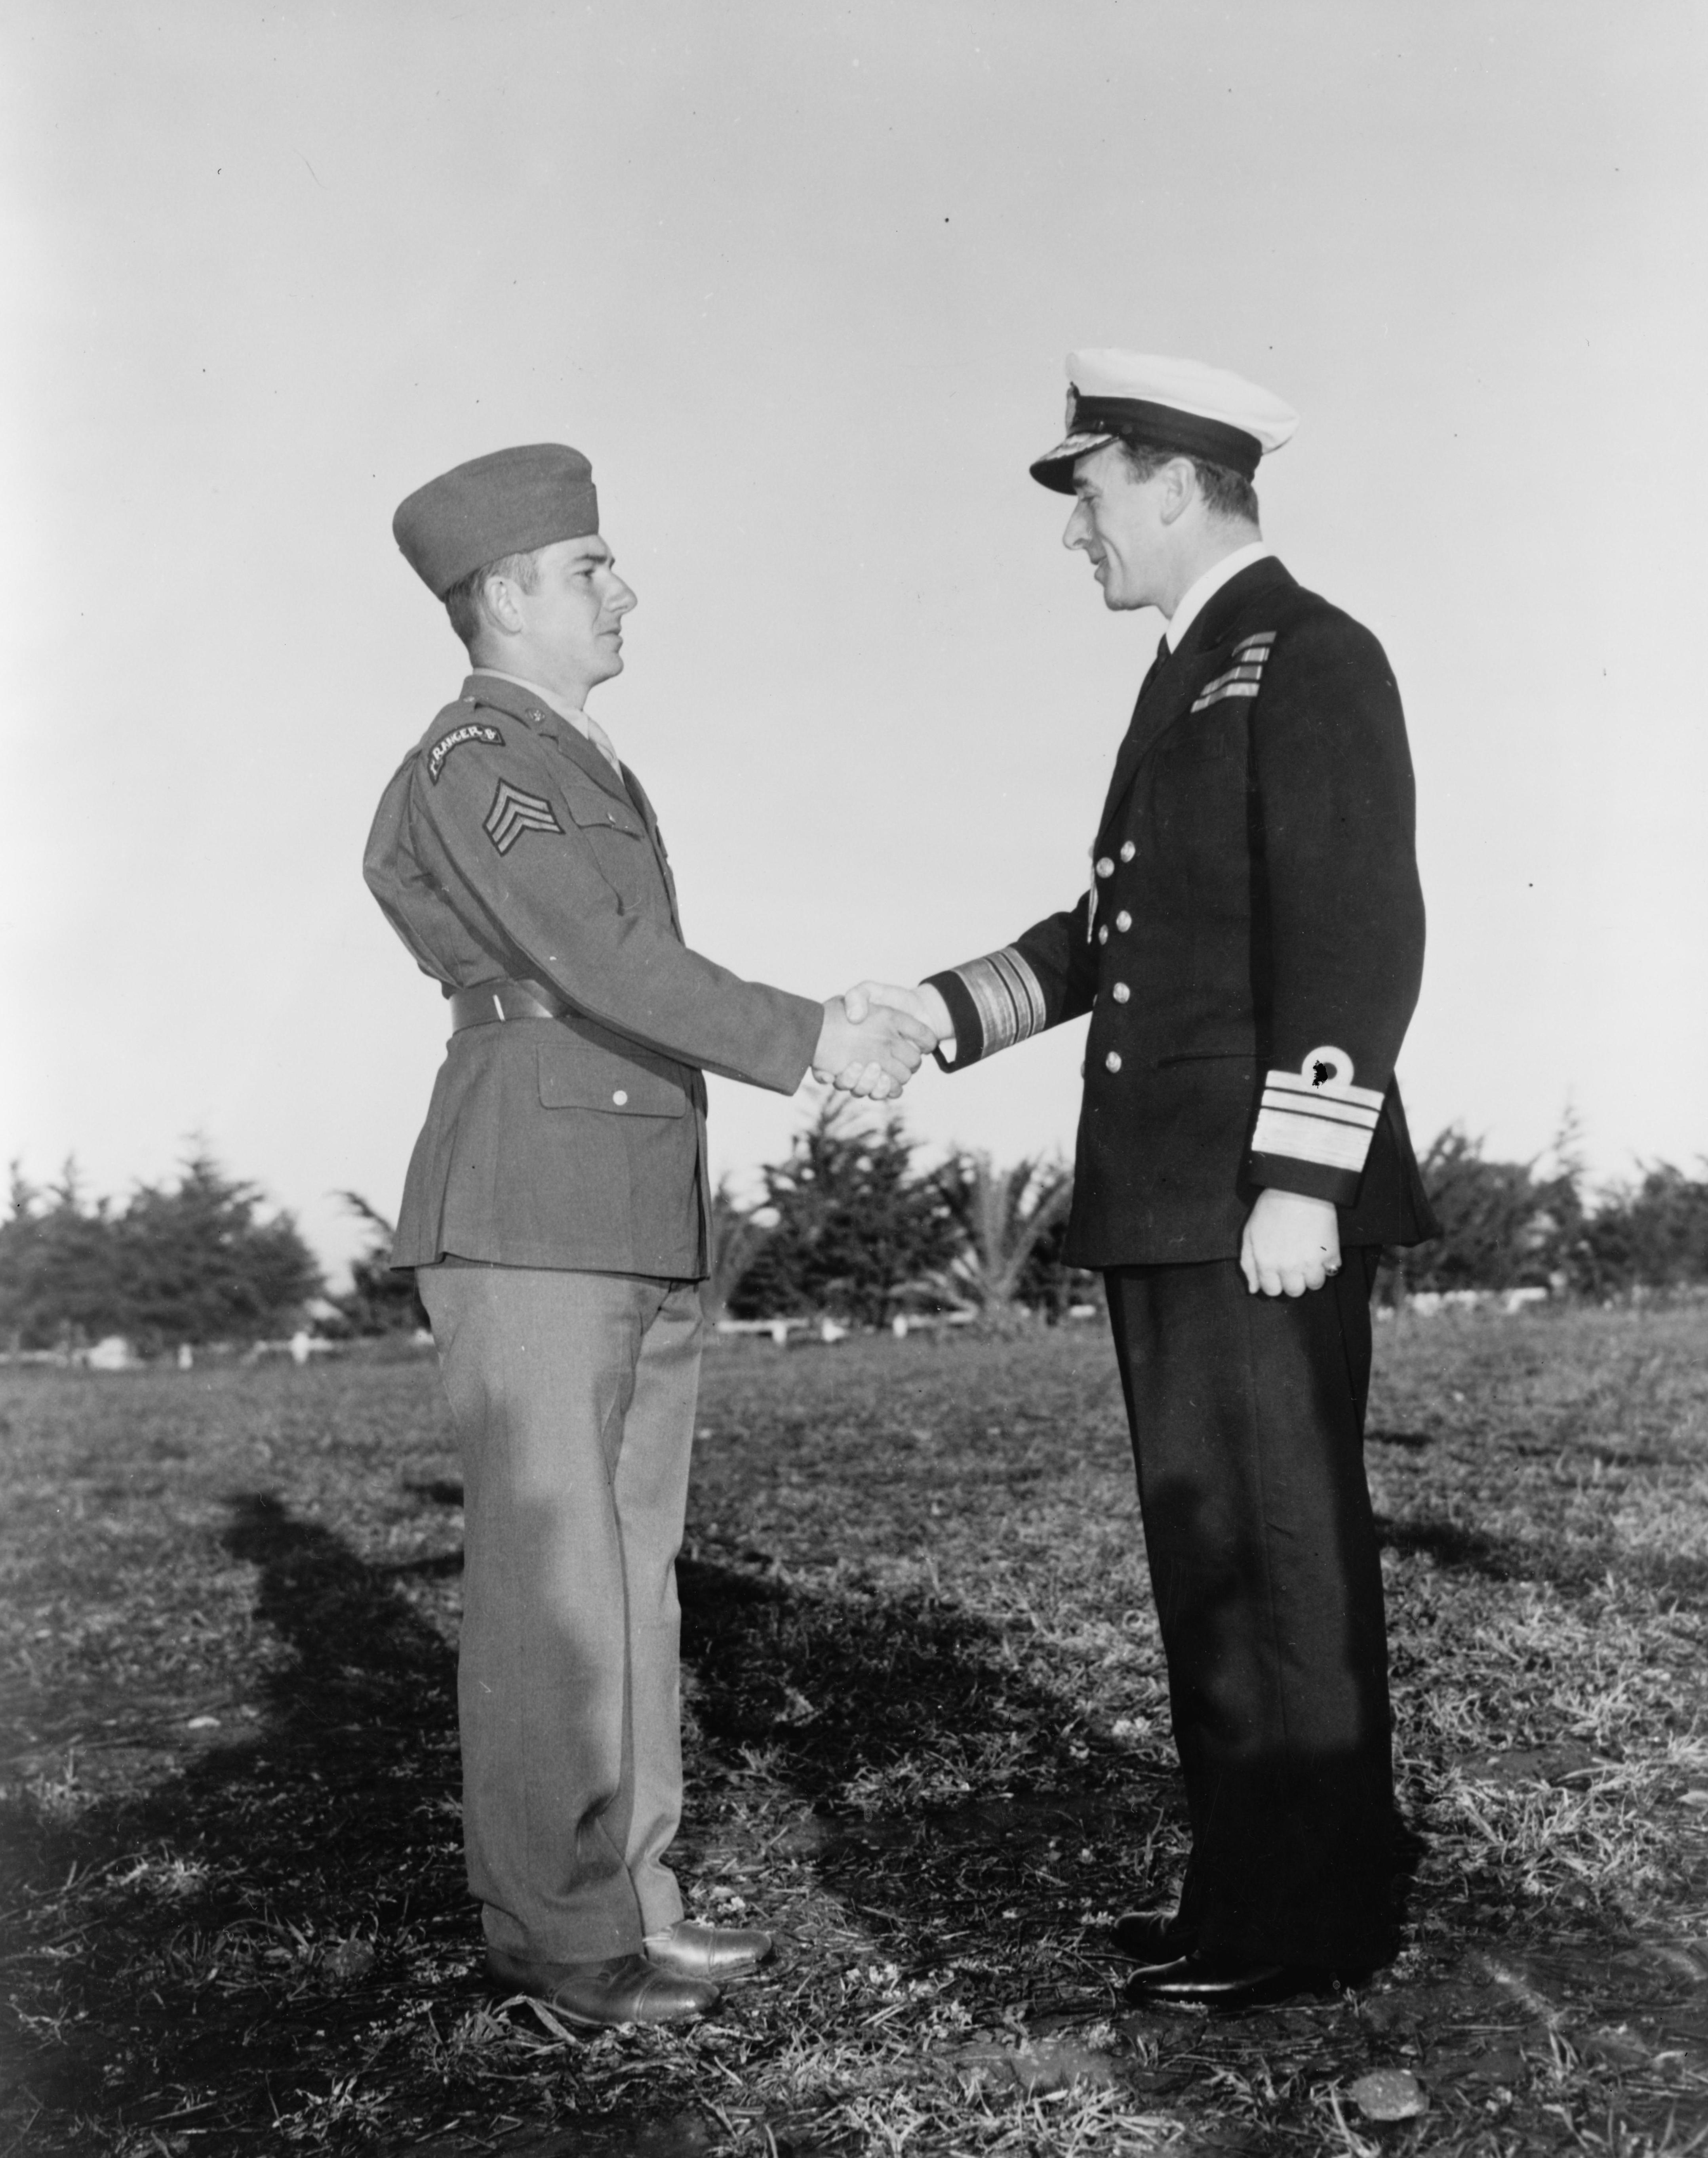 US Army Ranger Sergeant Franklin Koons shaking hands with British Vice Admiral Louis Mountbatten immediately following being presented with Great Britain’s Military Medal at Casablanca, French Morocco, 18 Jan 1943